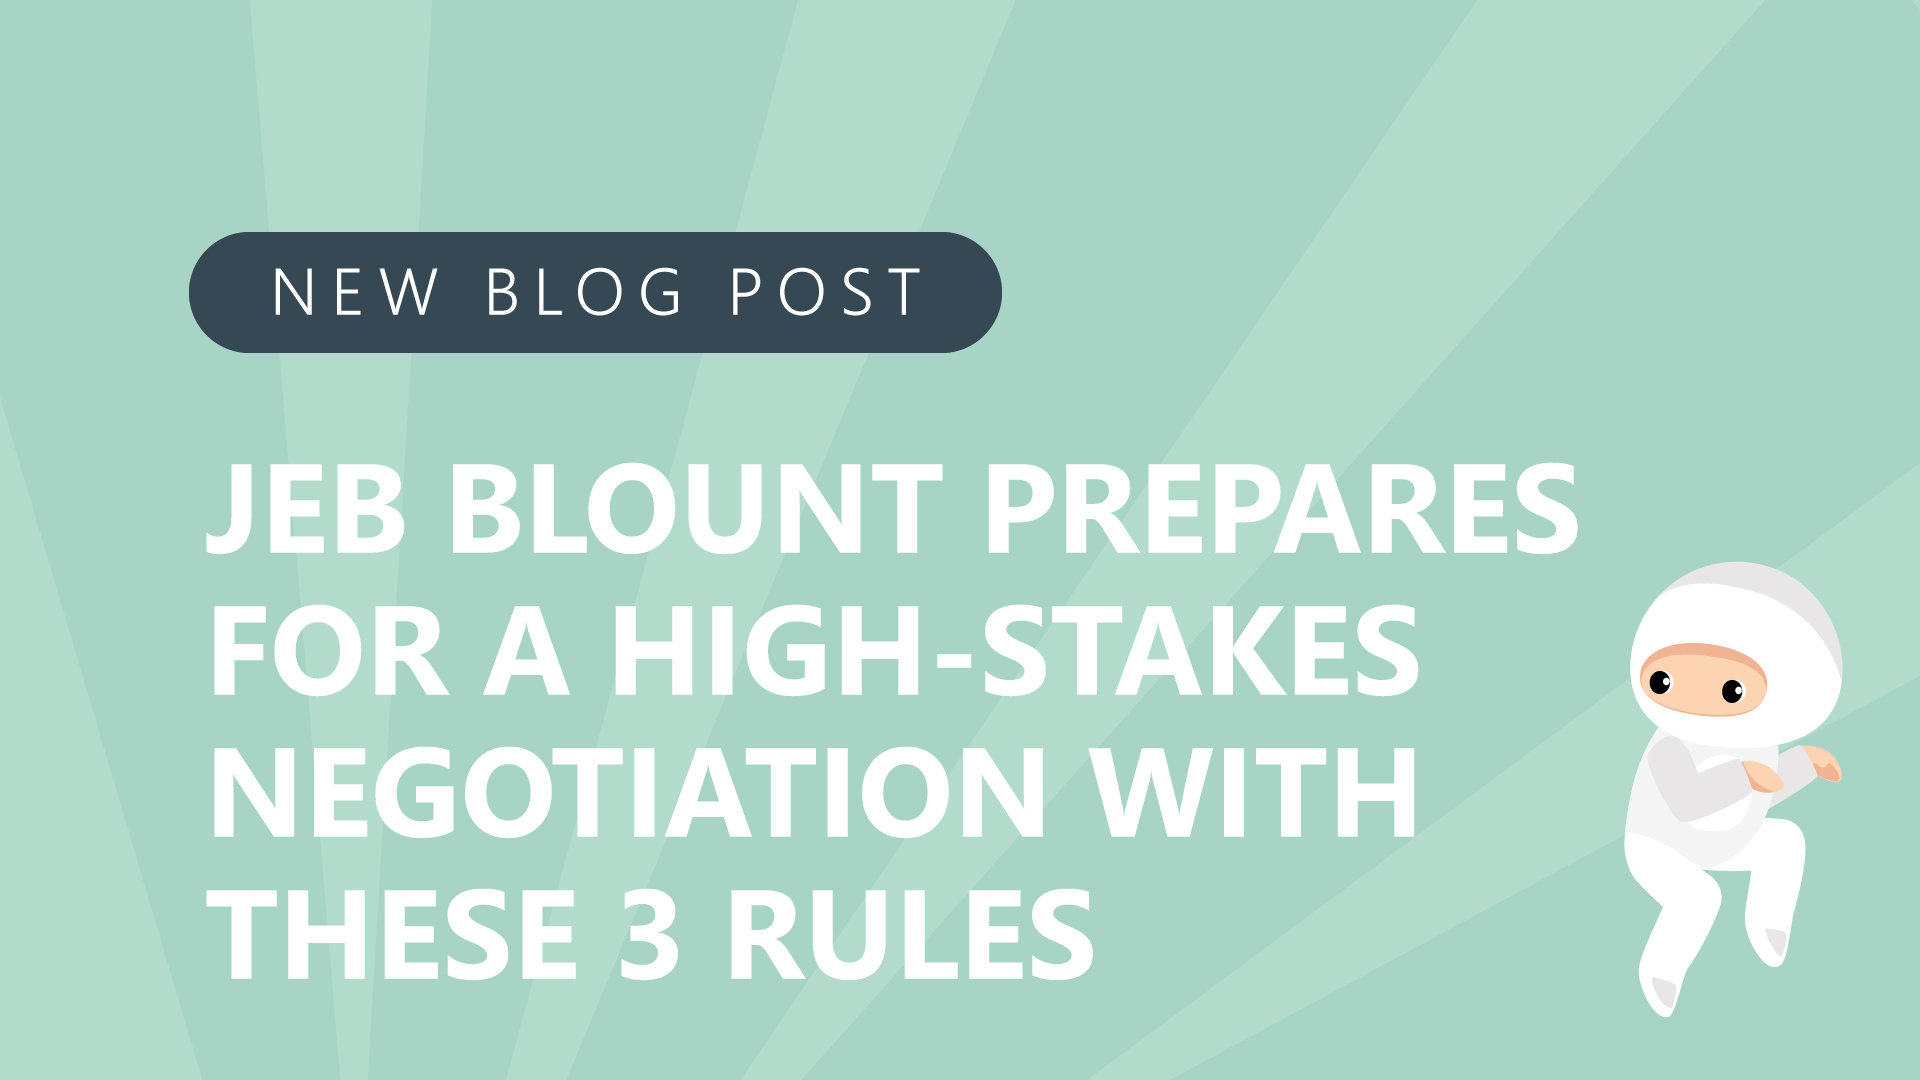 35-Jeb-Blount-Prepares-for-a-High-Stakes-Negotiation-with-These-3-Rules.jpg